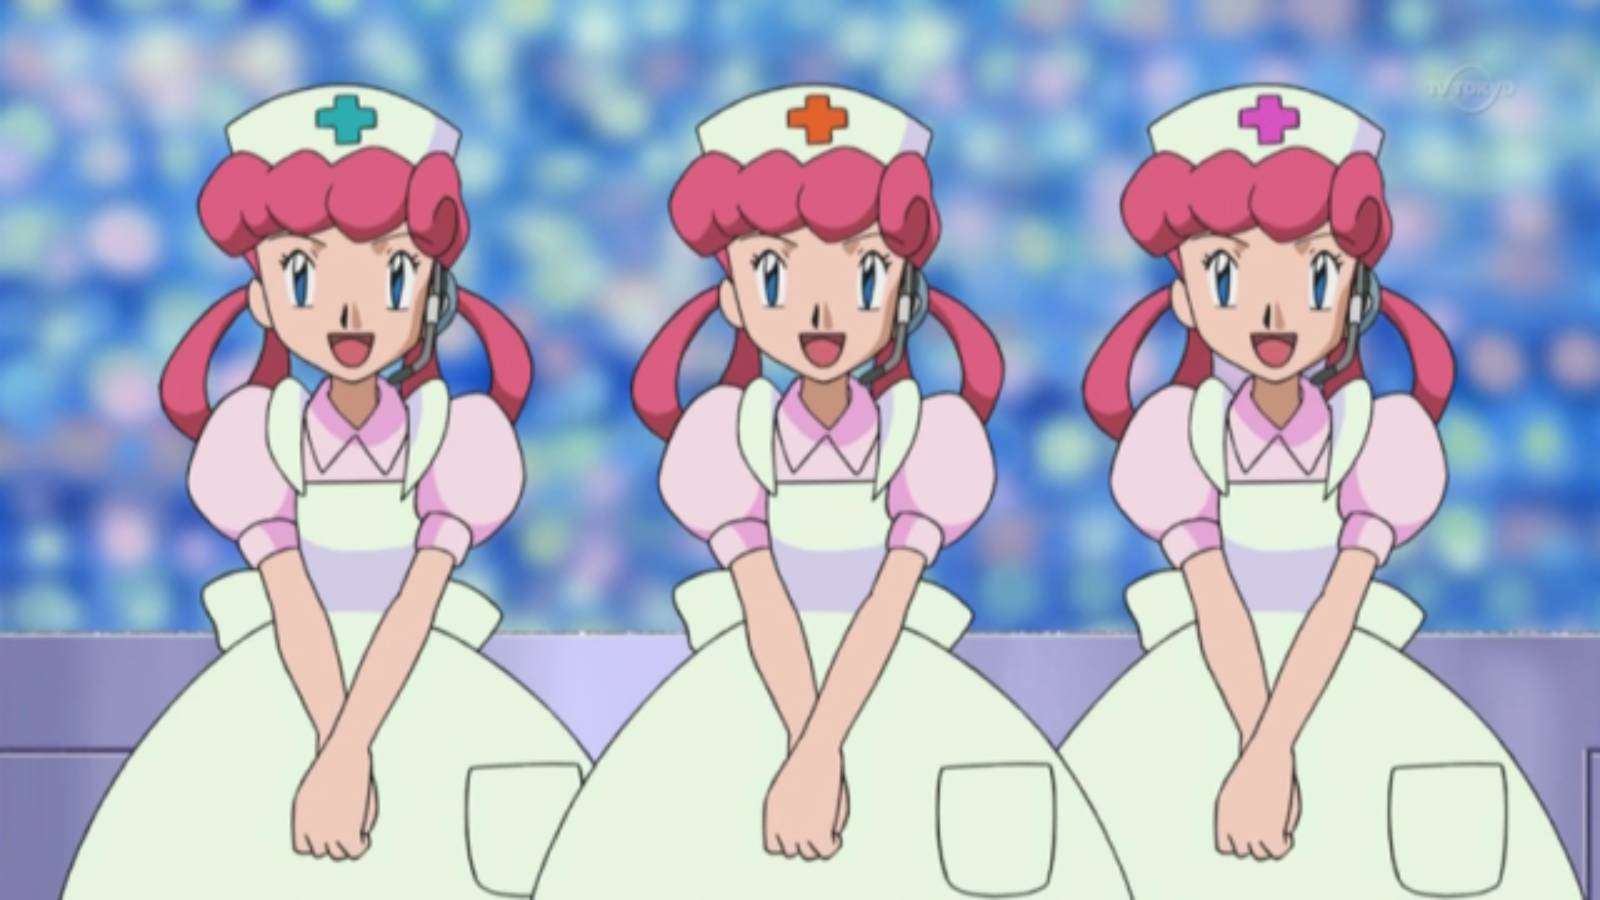 A still from the Pokemon anime shows three different Nurse Joy lined up in a row